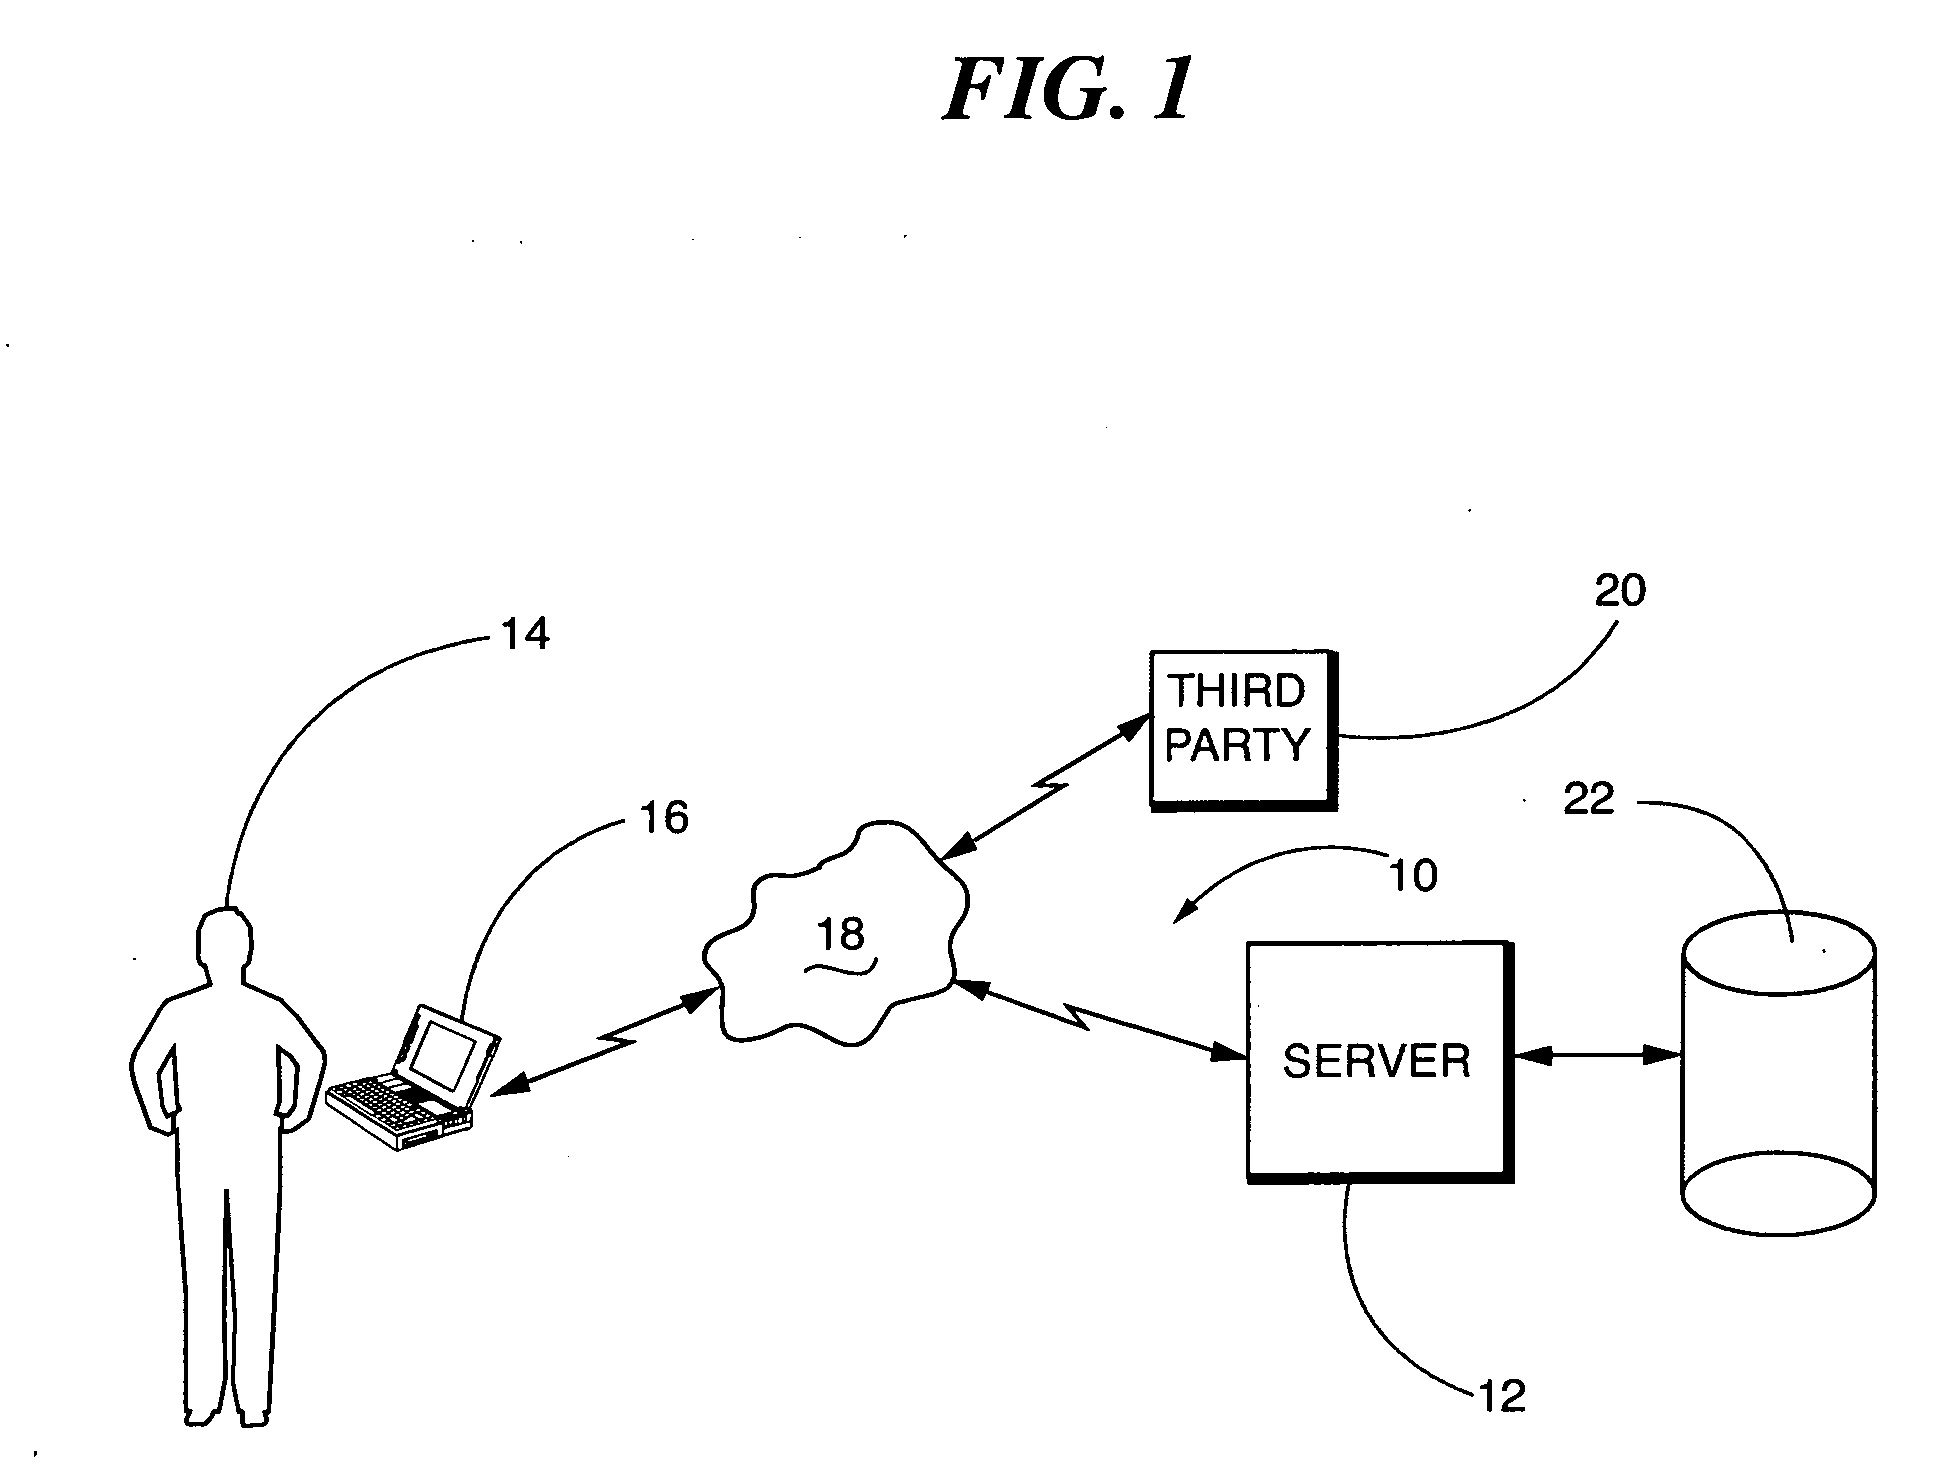 Method and apparatus for on-demand directed diet advice